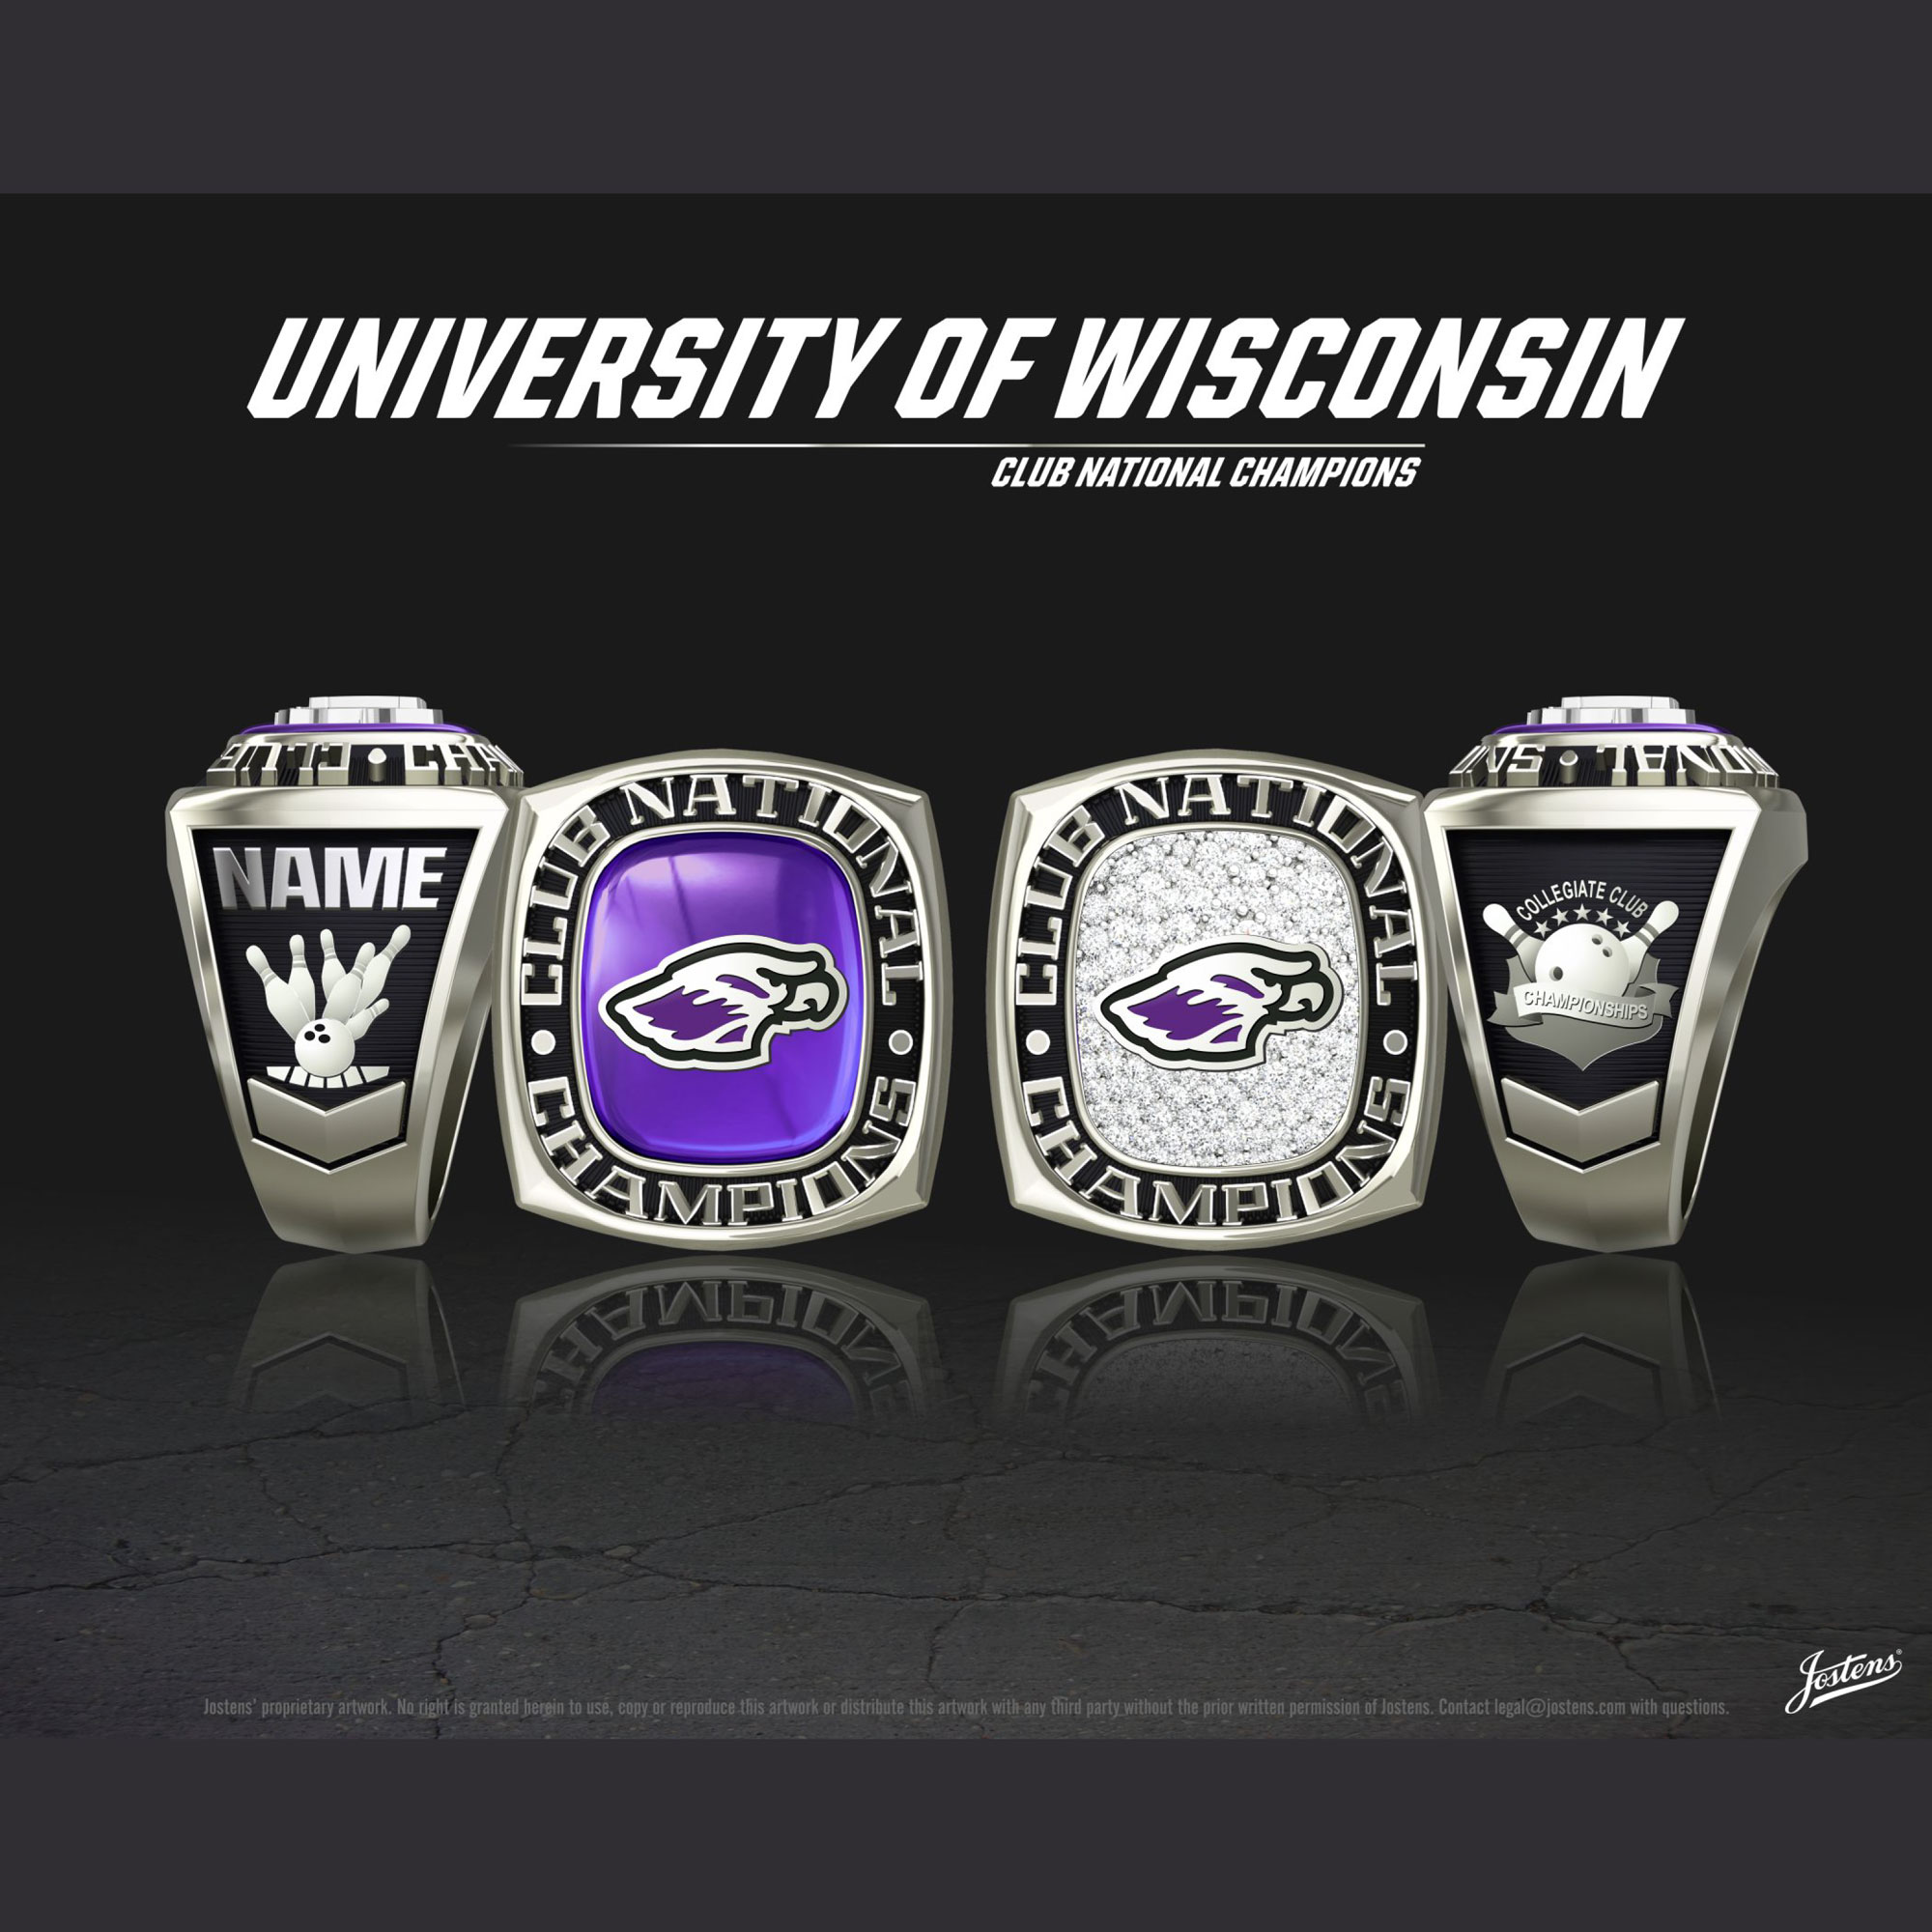 University of Wisconsin Whitewater Men's Bowling 2019 National Championship Ring